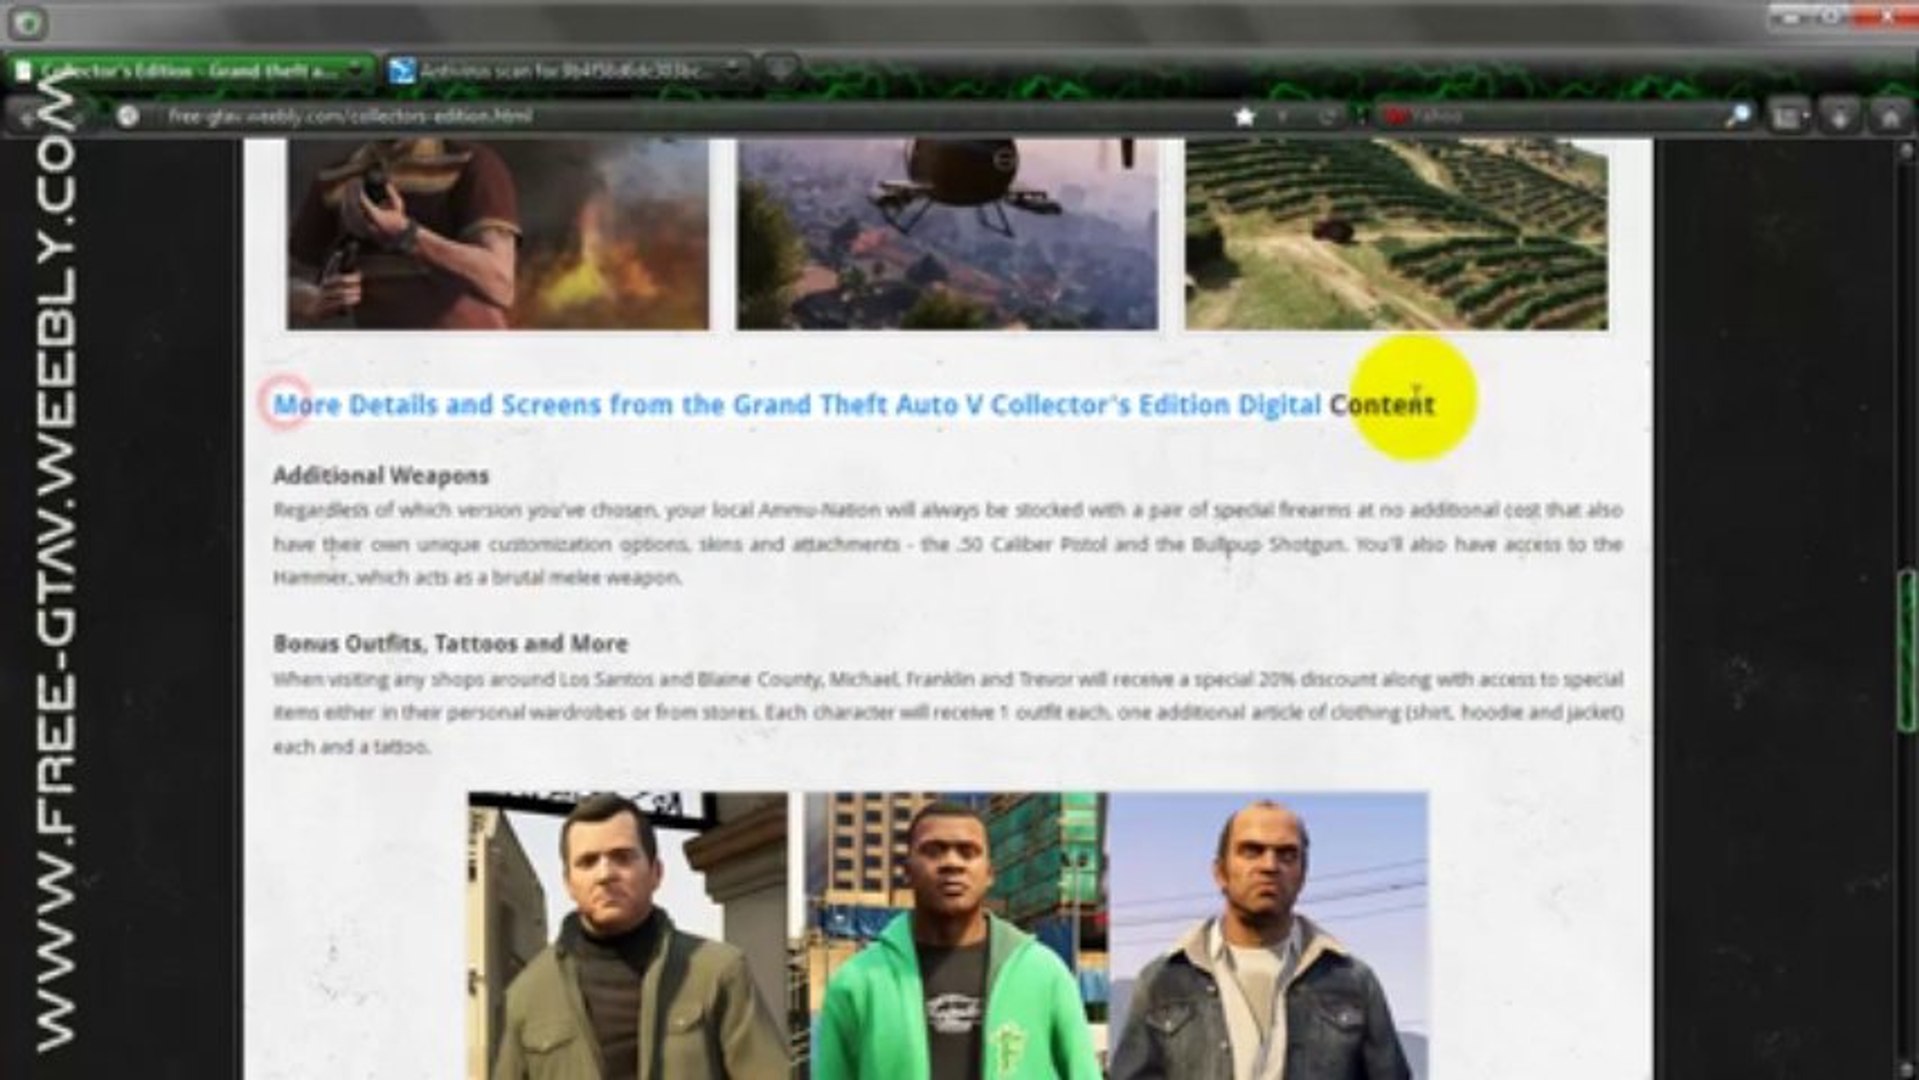 Grand Theft Auto 5 Atomic Blimp DLC Redeem Code Free Xbox 360 / PS3 - video  Dailymotion